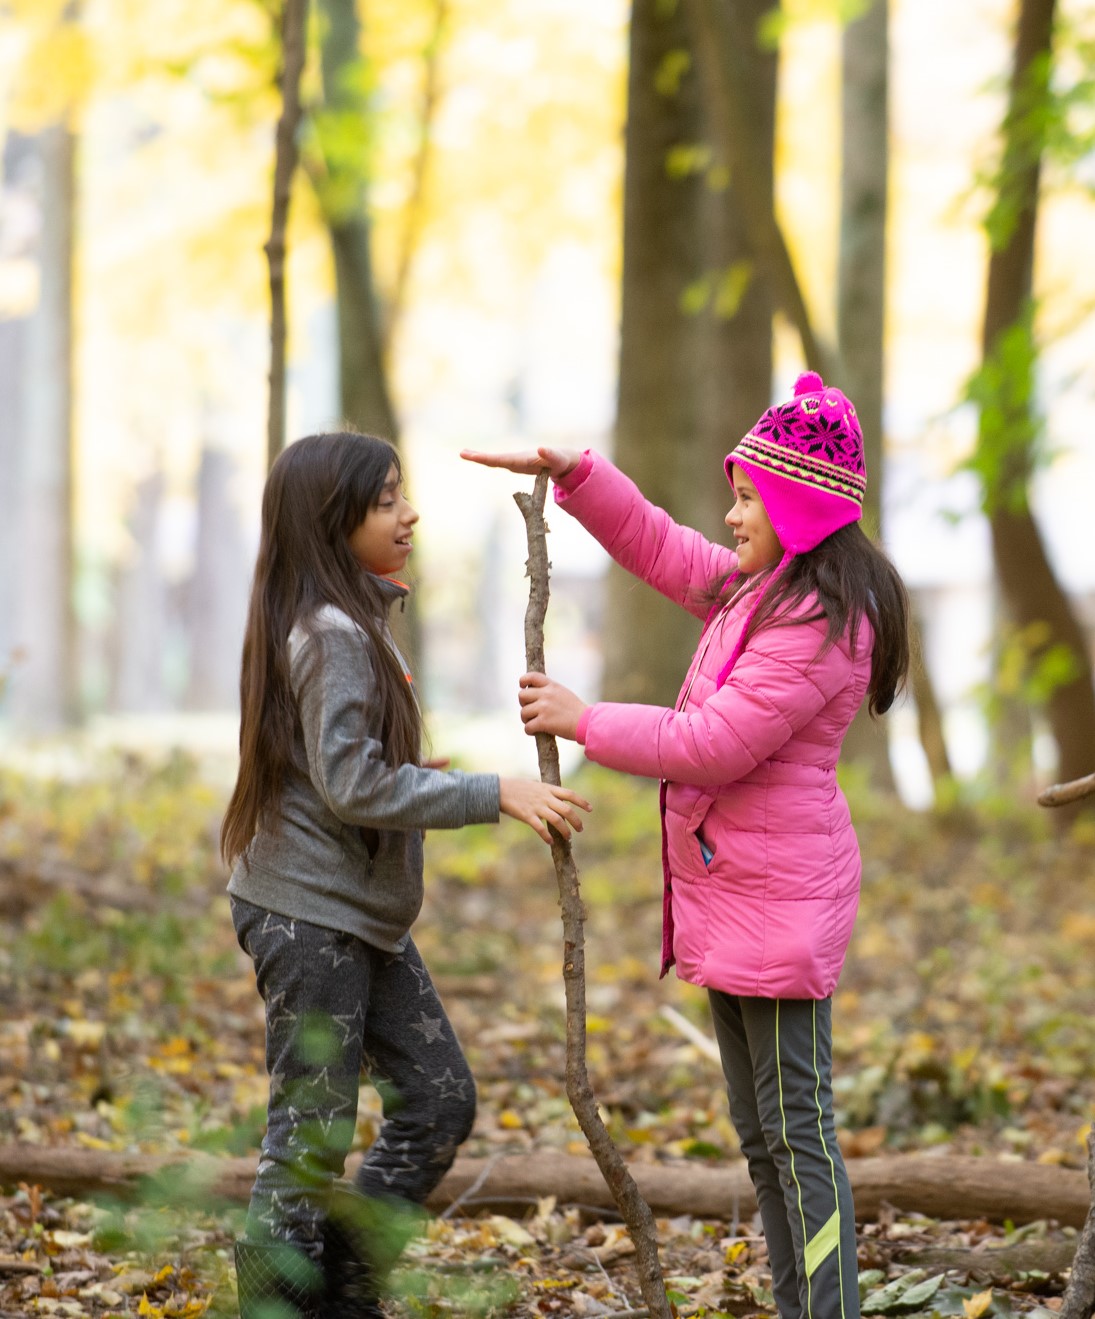 Two young girls measure how high a stick is with their hands for use in shelter building.